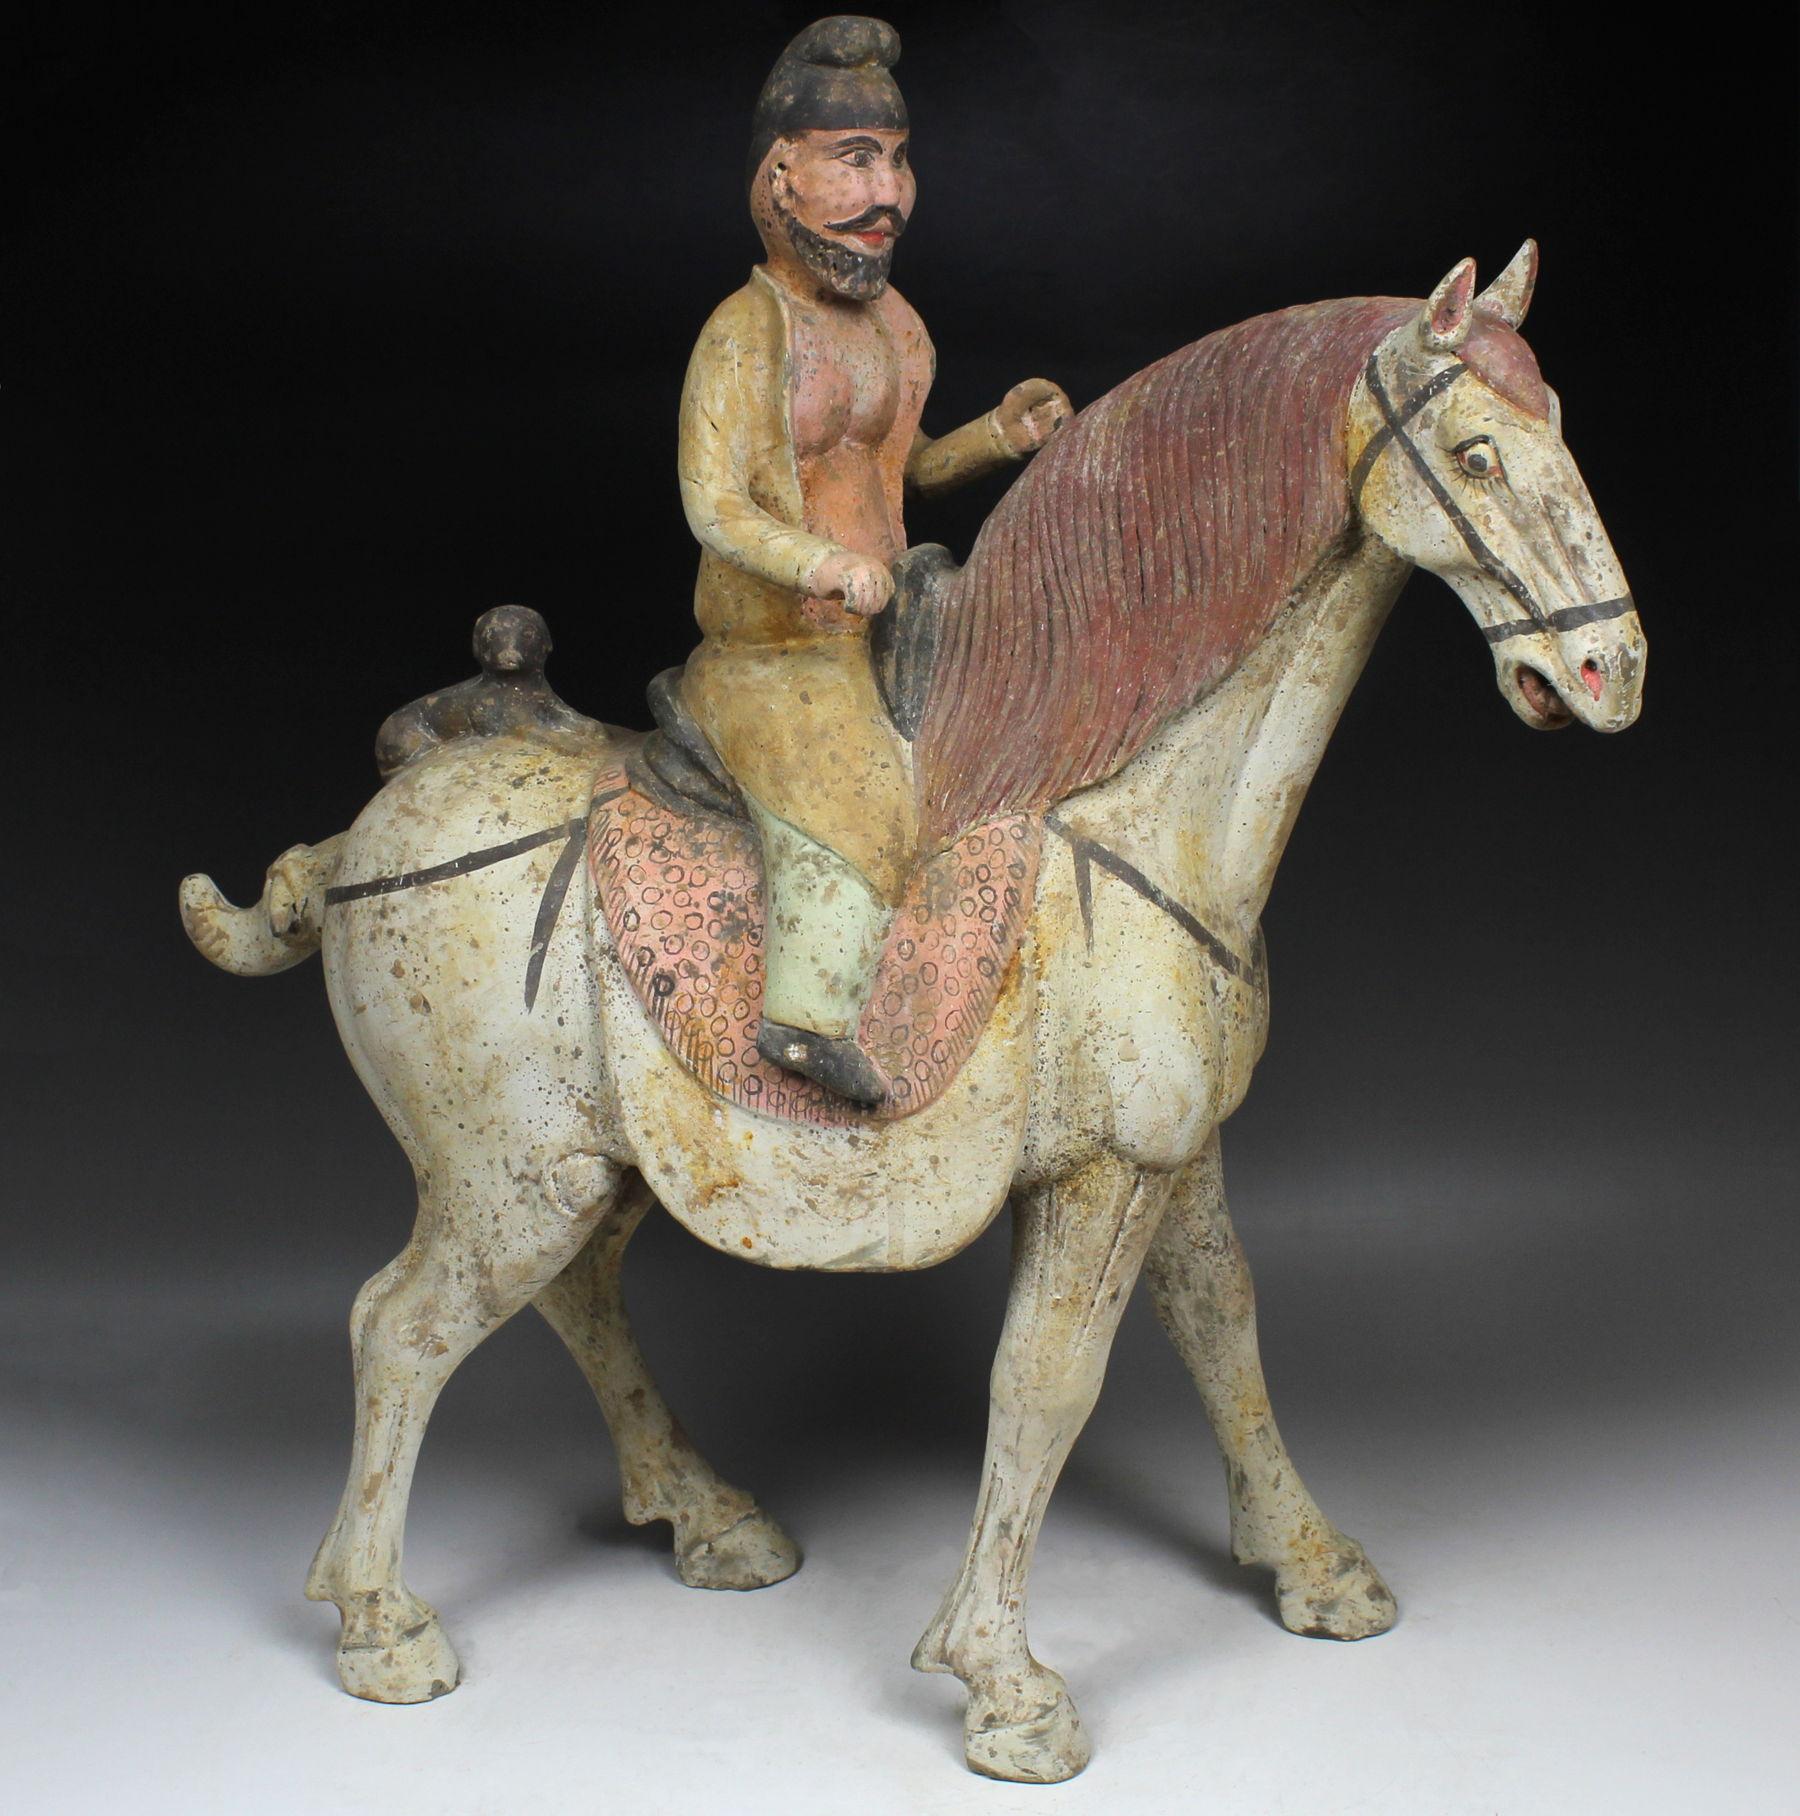 ITEM: Statuette of a Sogdian rider
MATERIAL: Pottery
CULTURE: Chinese, Tang Dynasty
PERIOD: 618 – 907 A.D
DIMENSIONS: 560 mm x 510 mm x 175 mm
CONDITION: Good condition. Includes Thermoluminescence test by Laboratory Kotalla (Reference